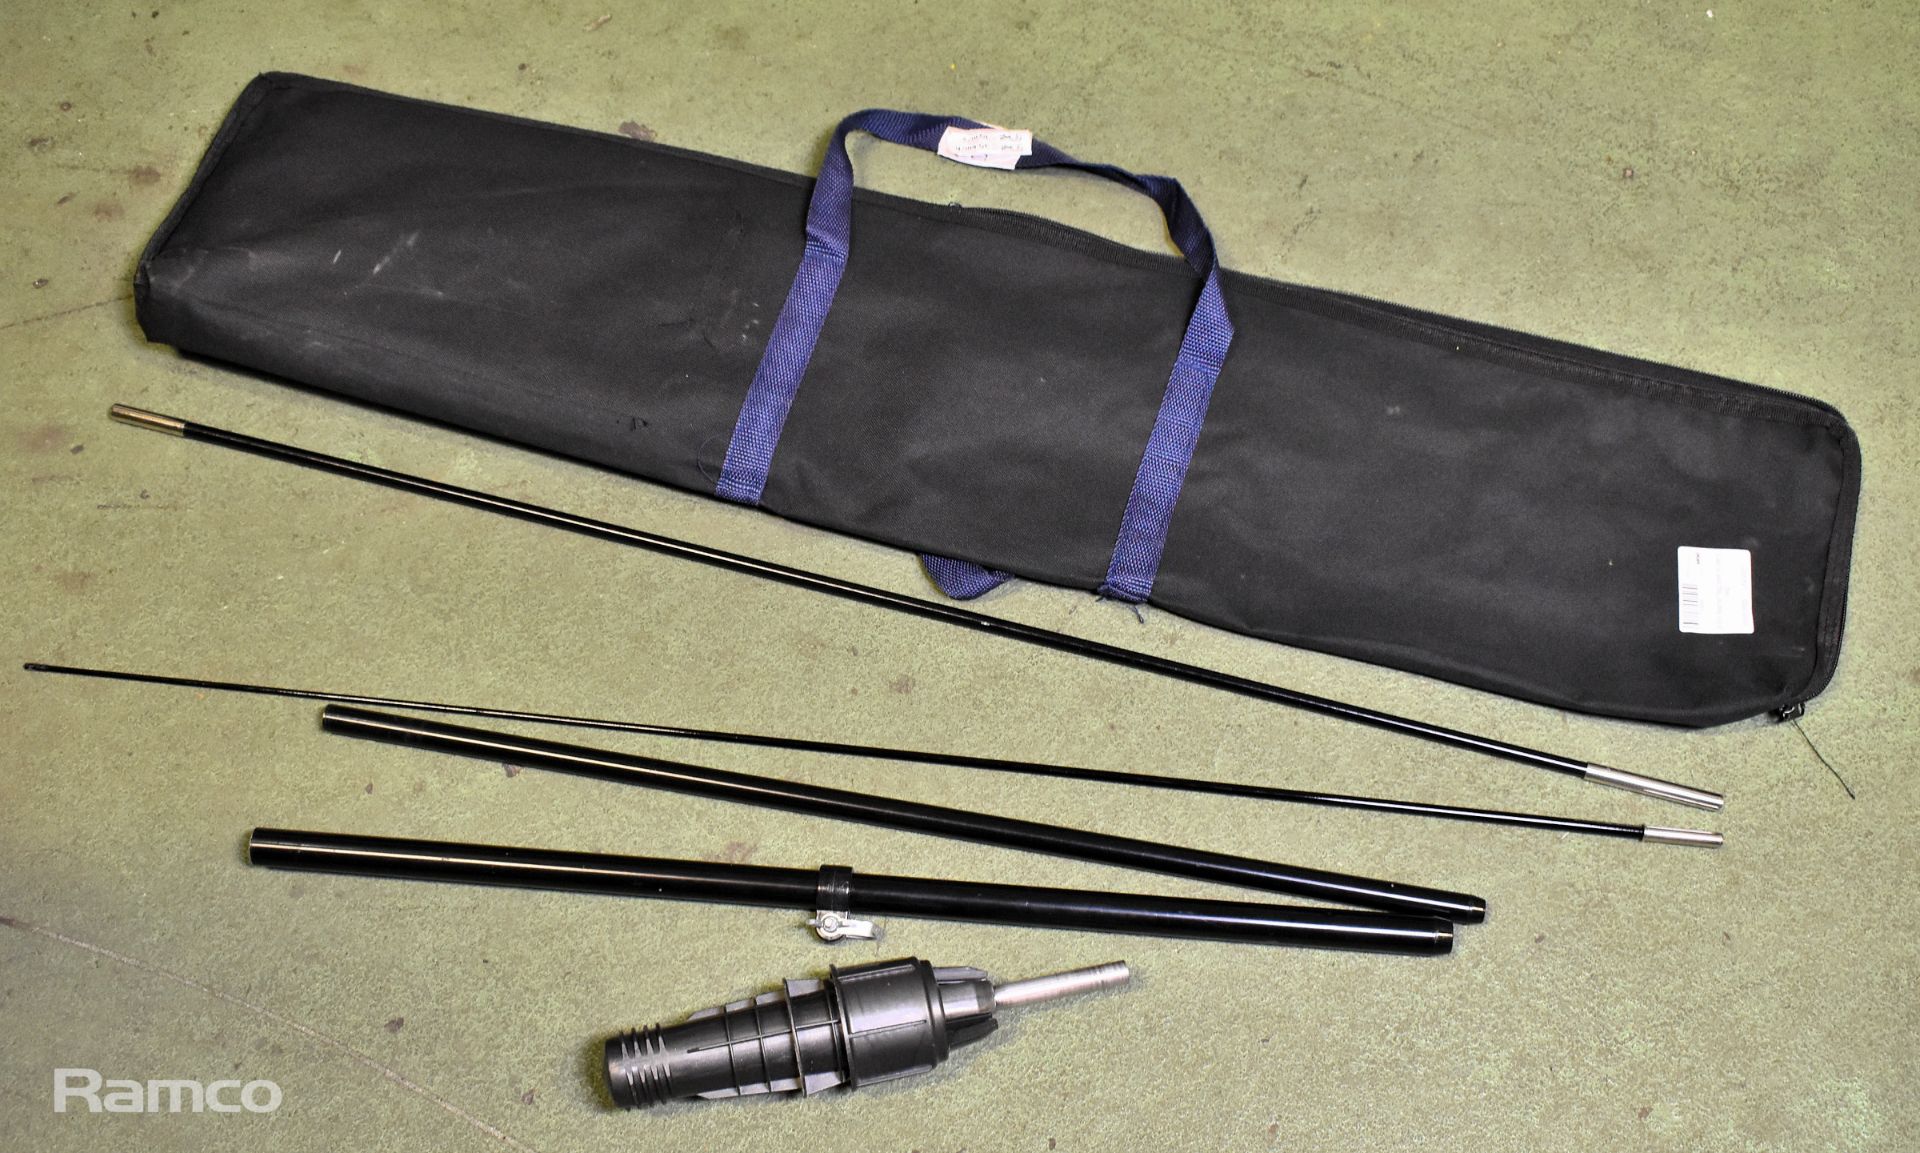 7x 3.5m feather flag poles in carry bag - Image 2 of 2